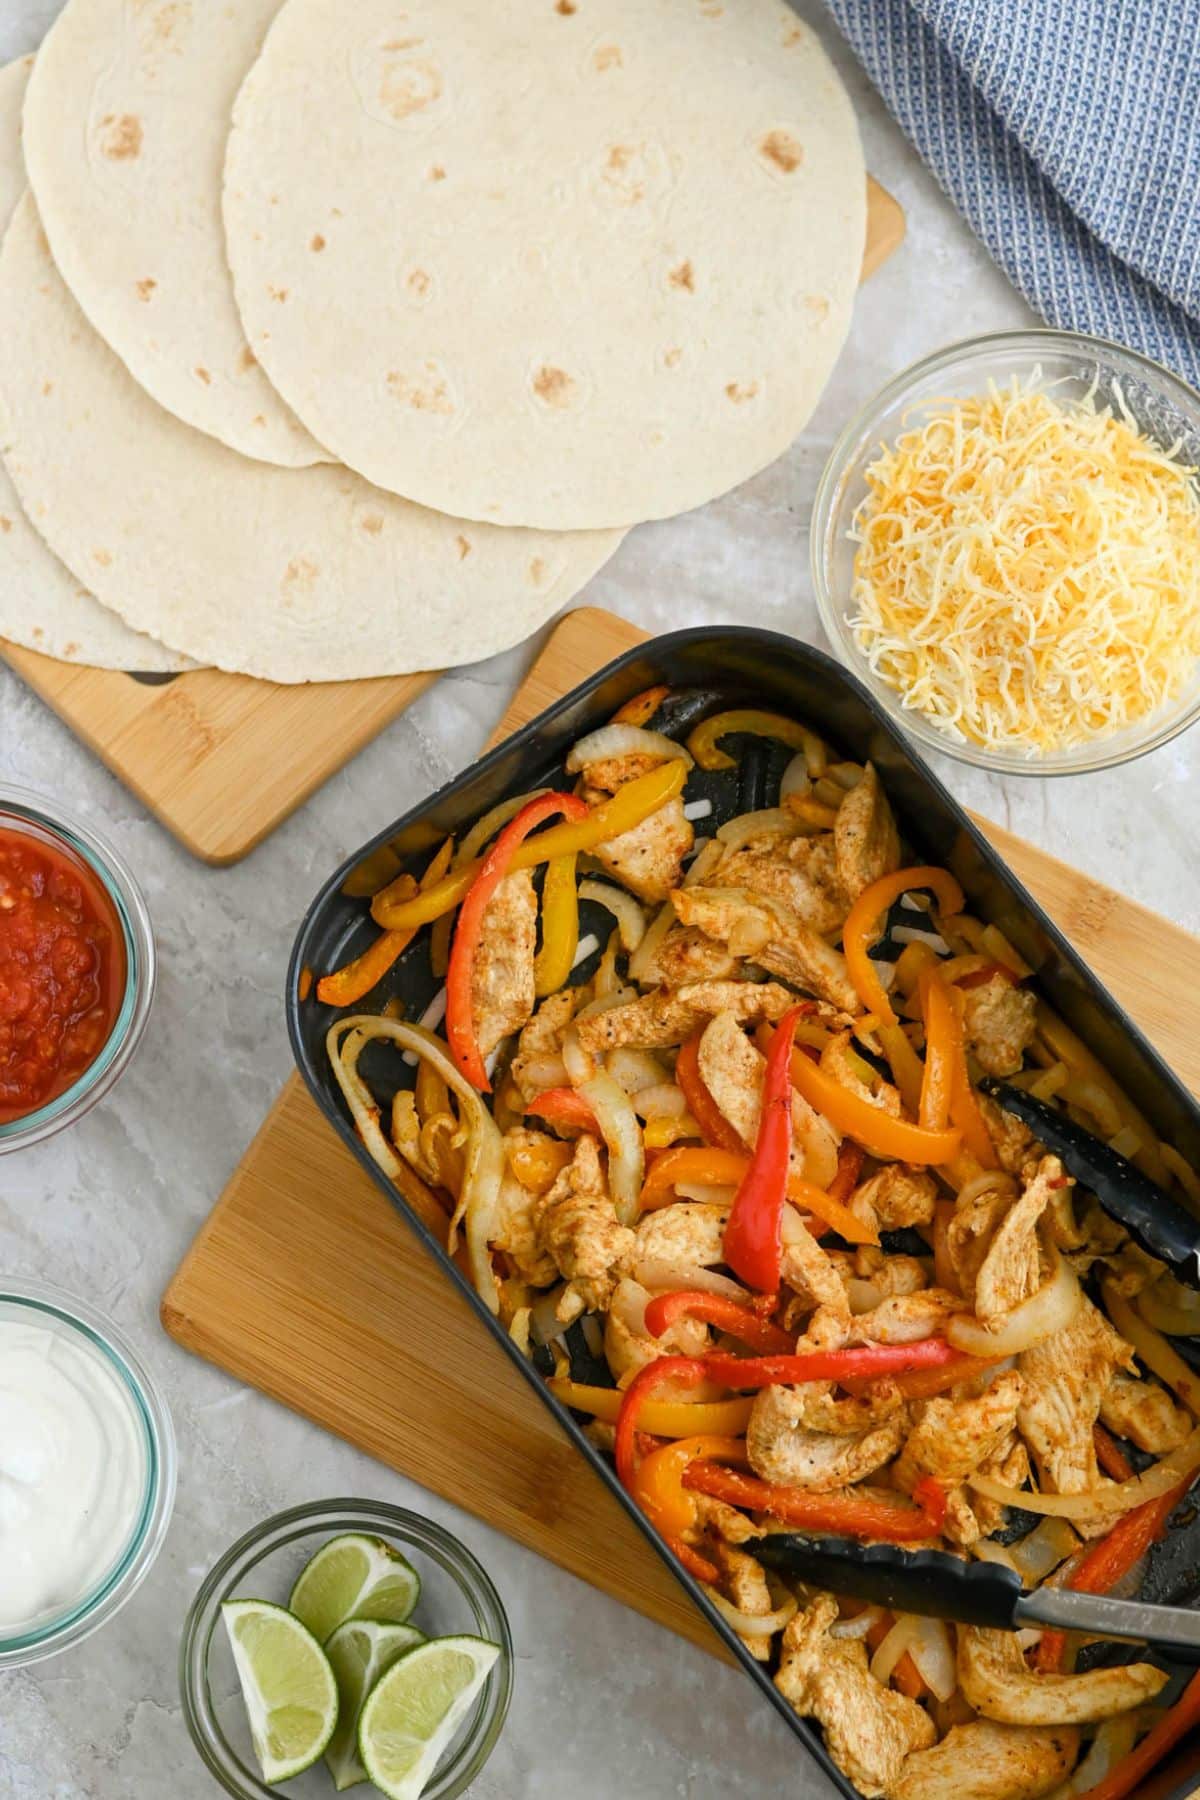 Top view of a chicken fajita meal with sliced bell peppers and onions in a skillet, surrounded by tortillas, cheese, salsa, sour cream, and lime wedges.